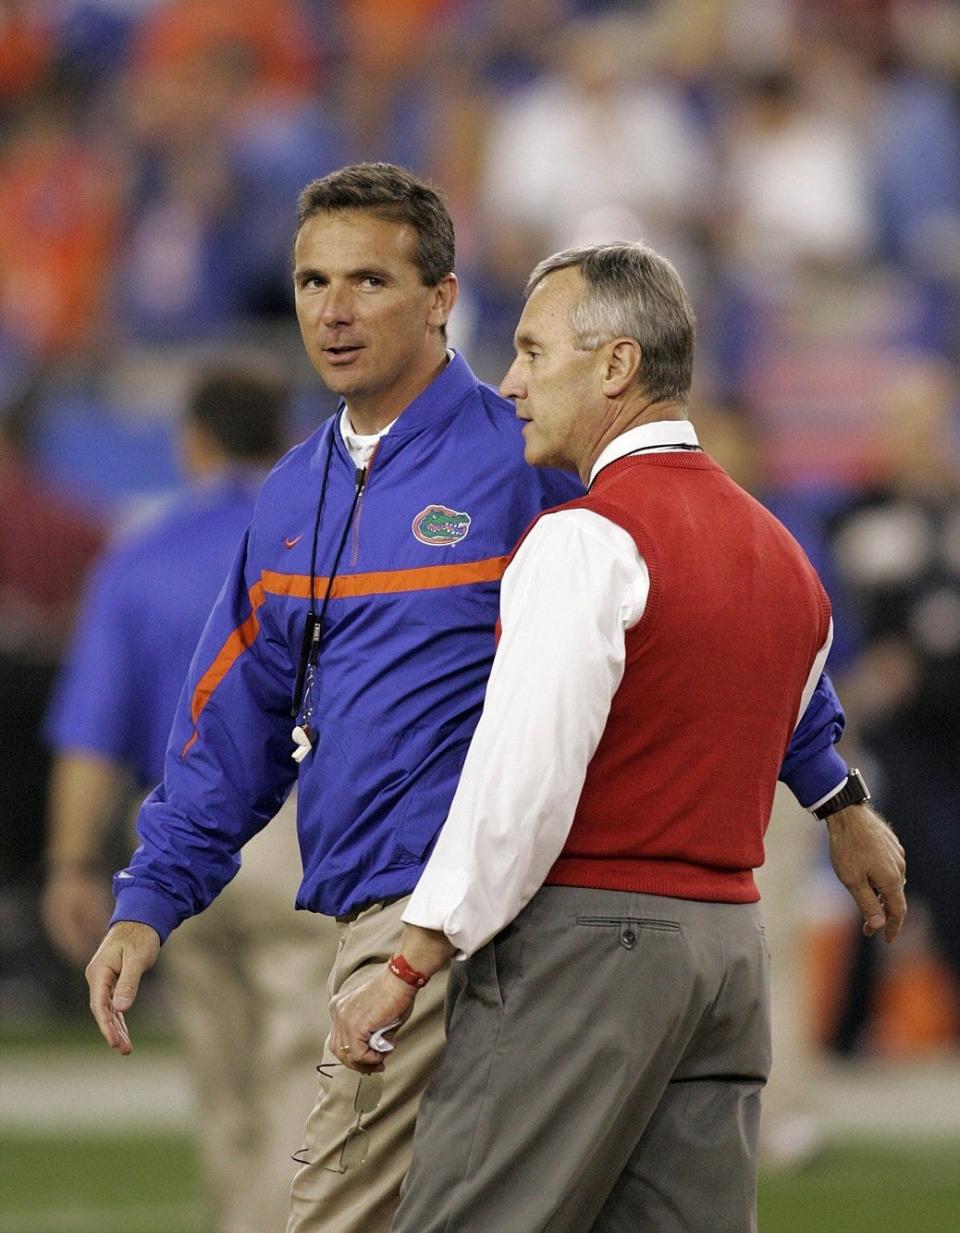 Ohio State coach Jim Tressel and Florida coach Urban Meyer meet before the the BCS championship game in 2007.